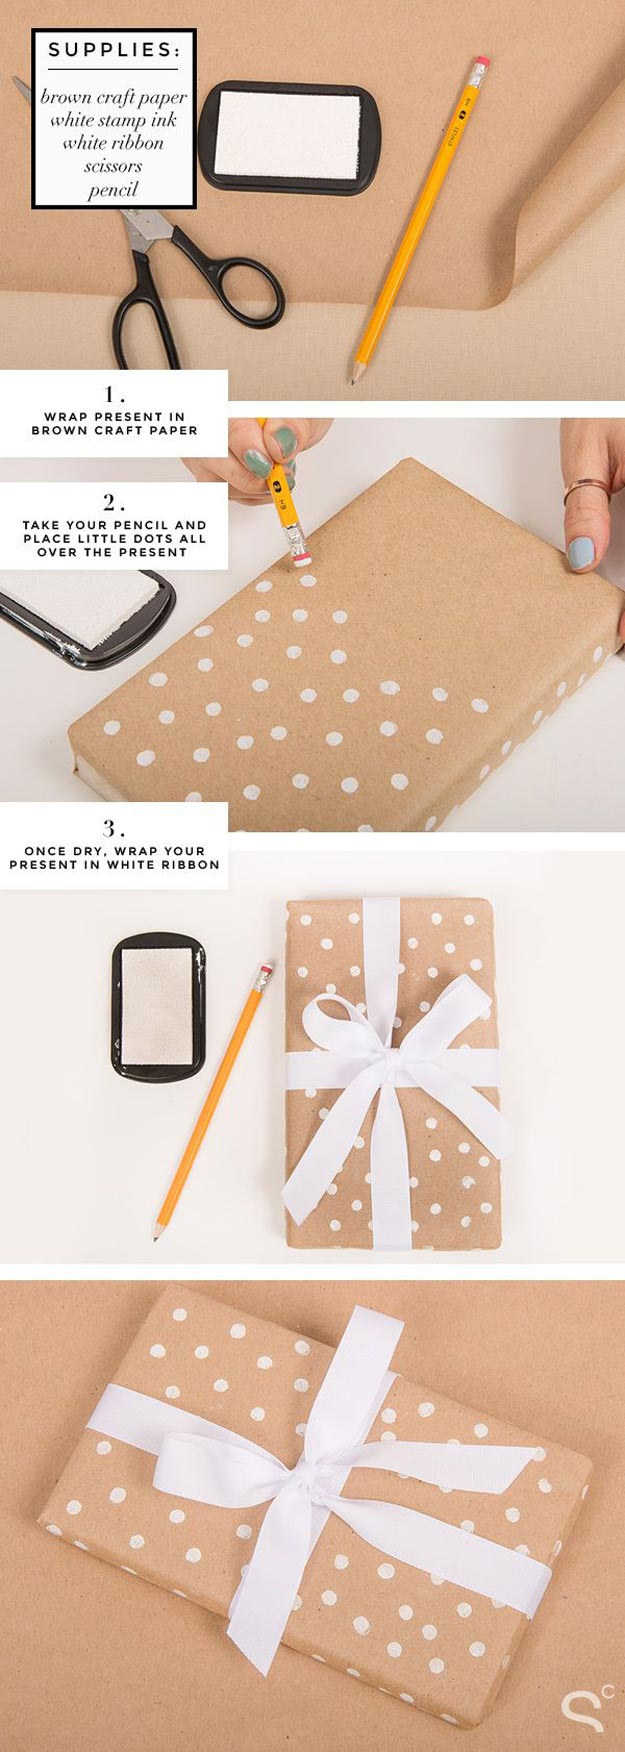 Christmas wrapping ideas 2020